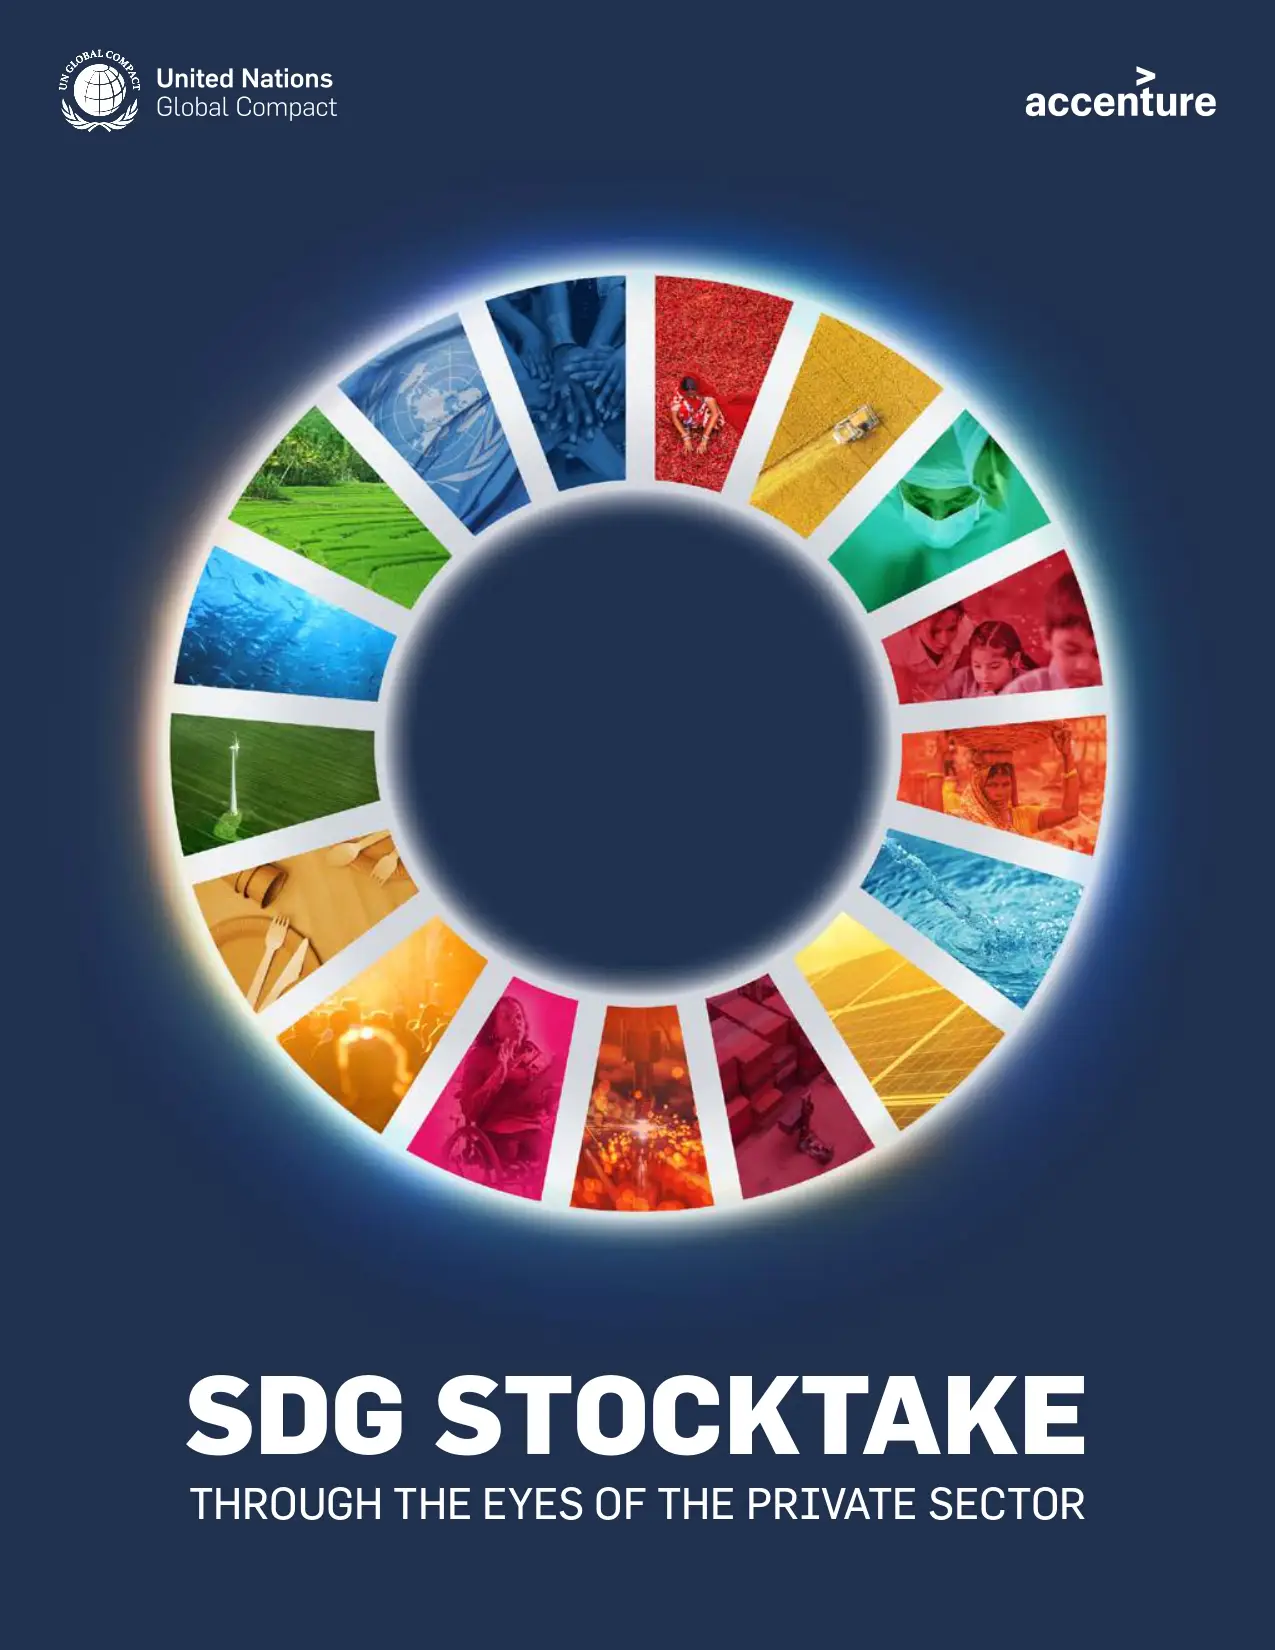 SDG Stocktake Through The Eyes Of The Private Sector